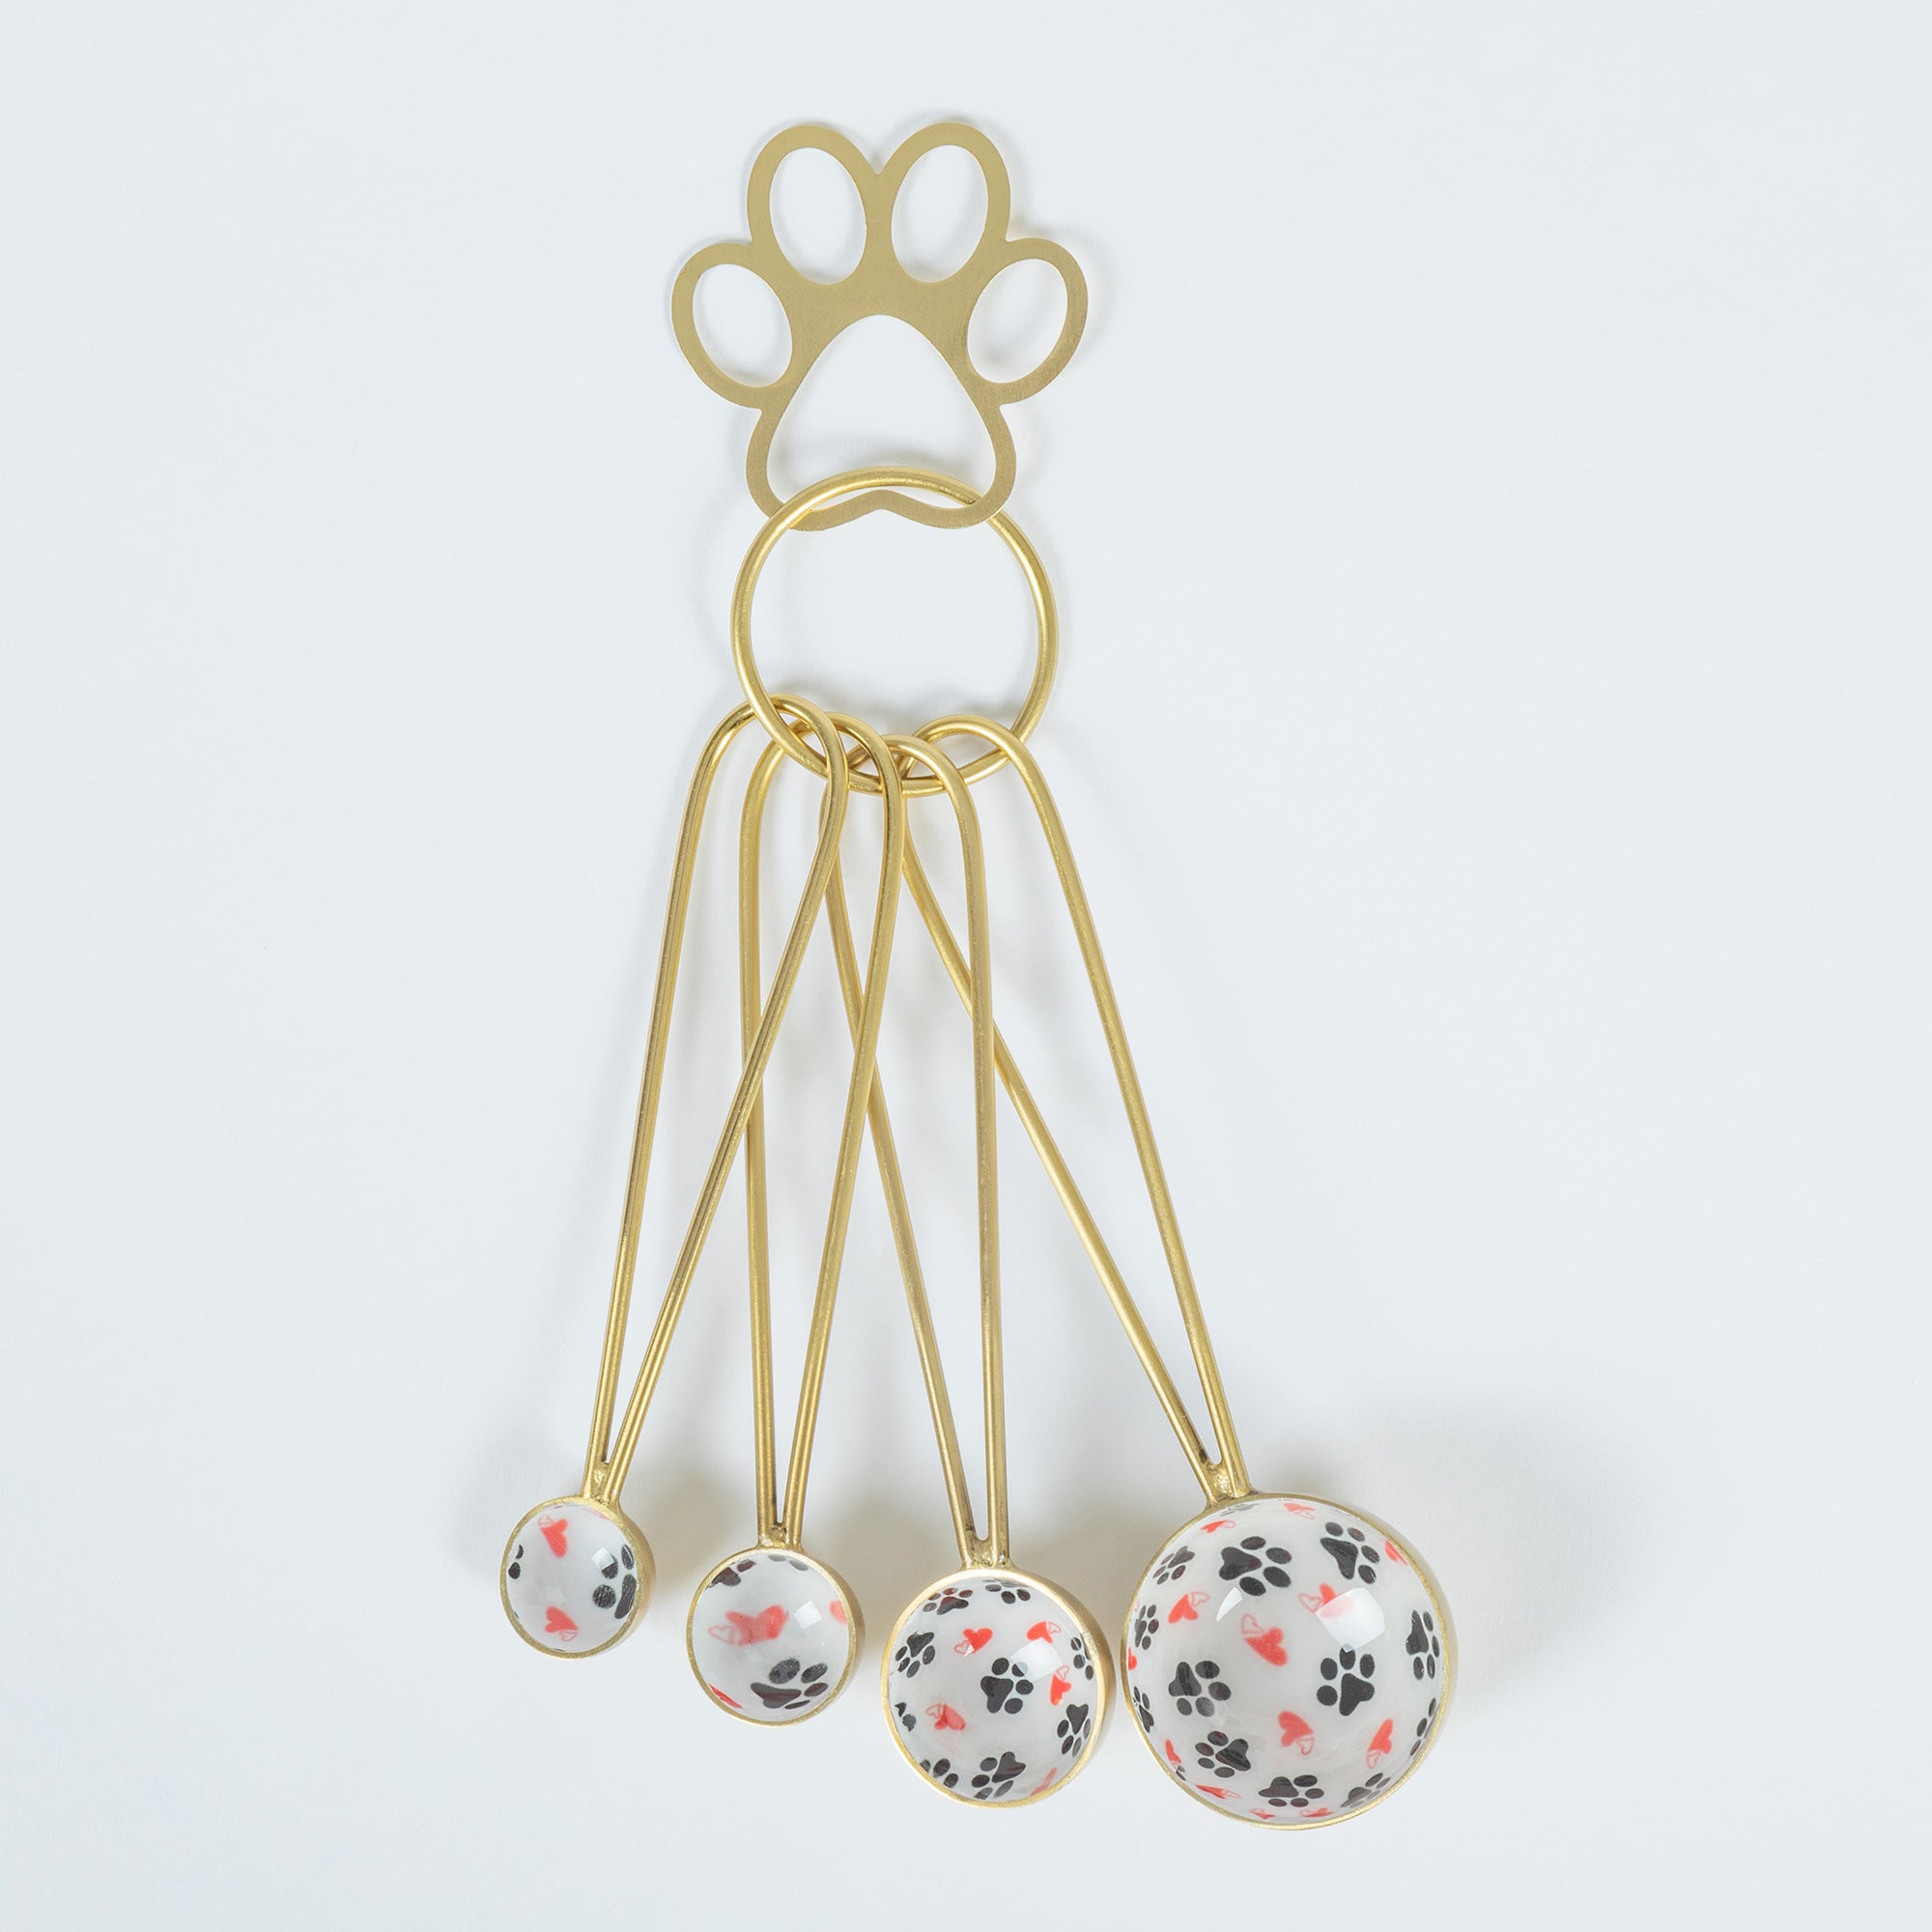 Pawfectly Patterned Measuring Tools - Hearts & Paws - Measuring Spoons